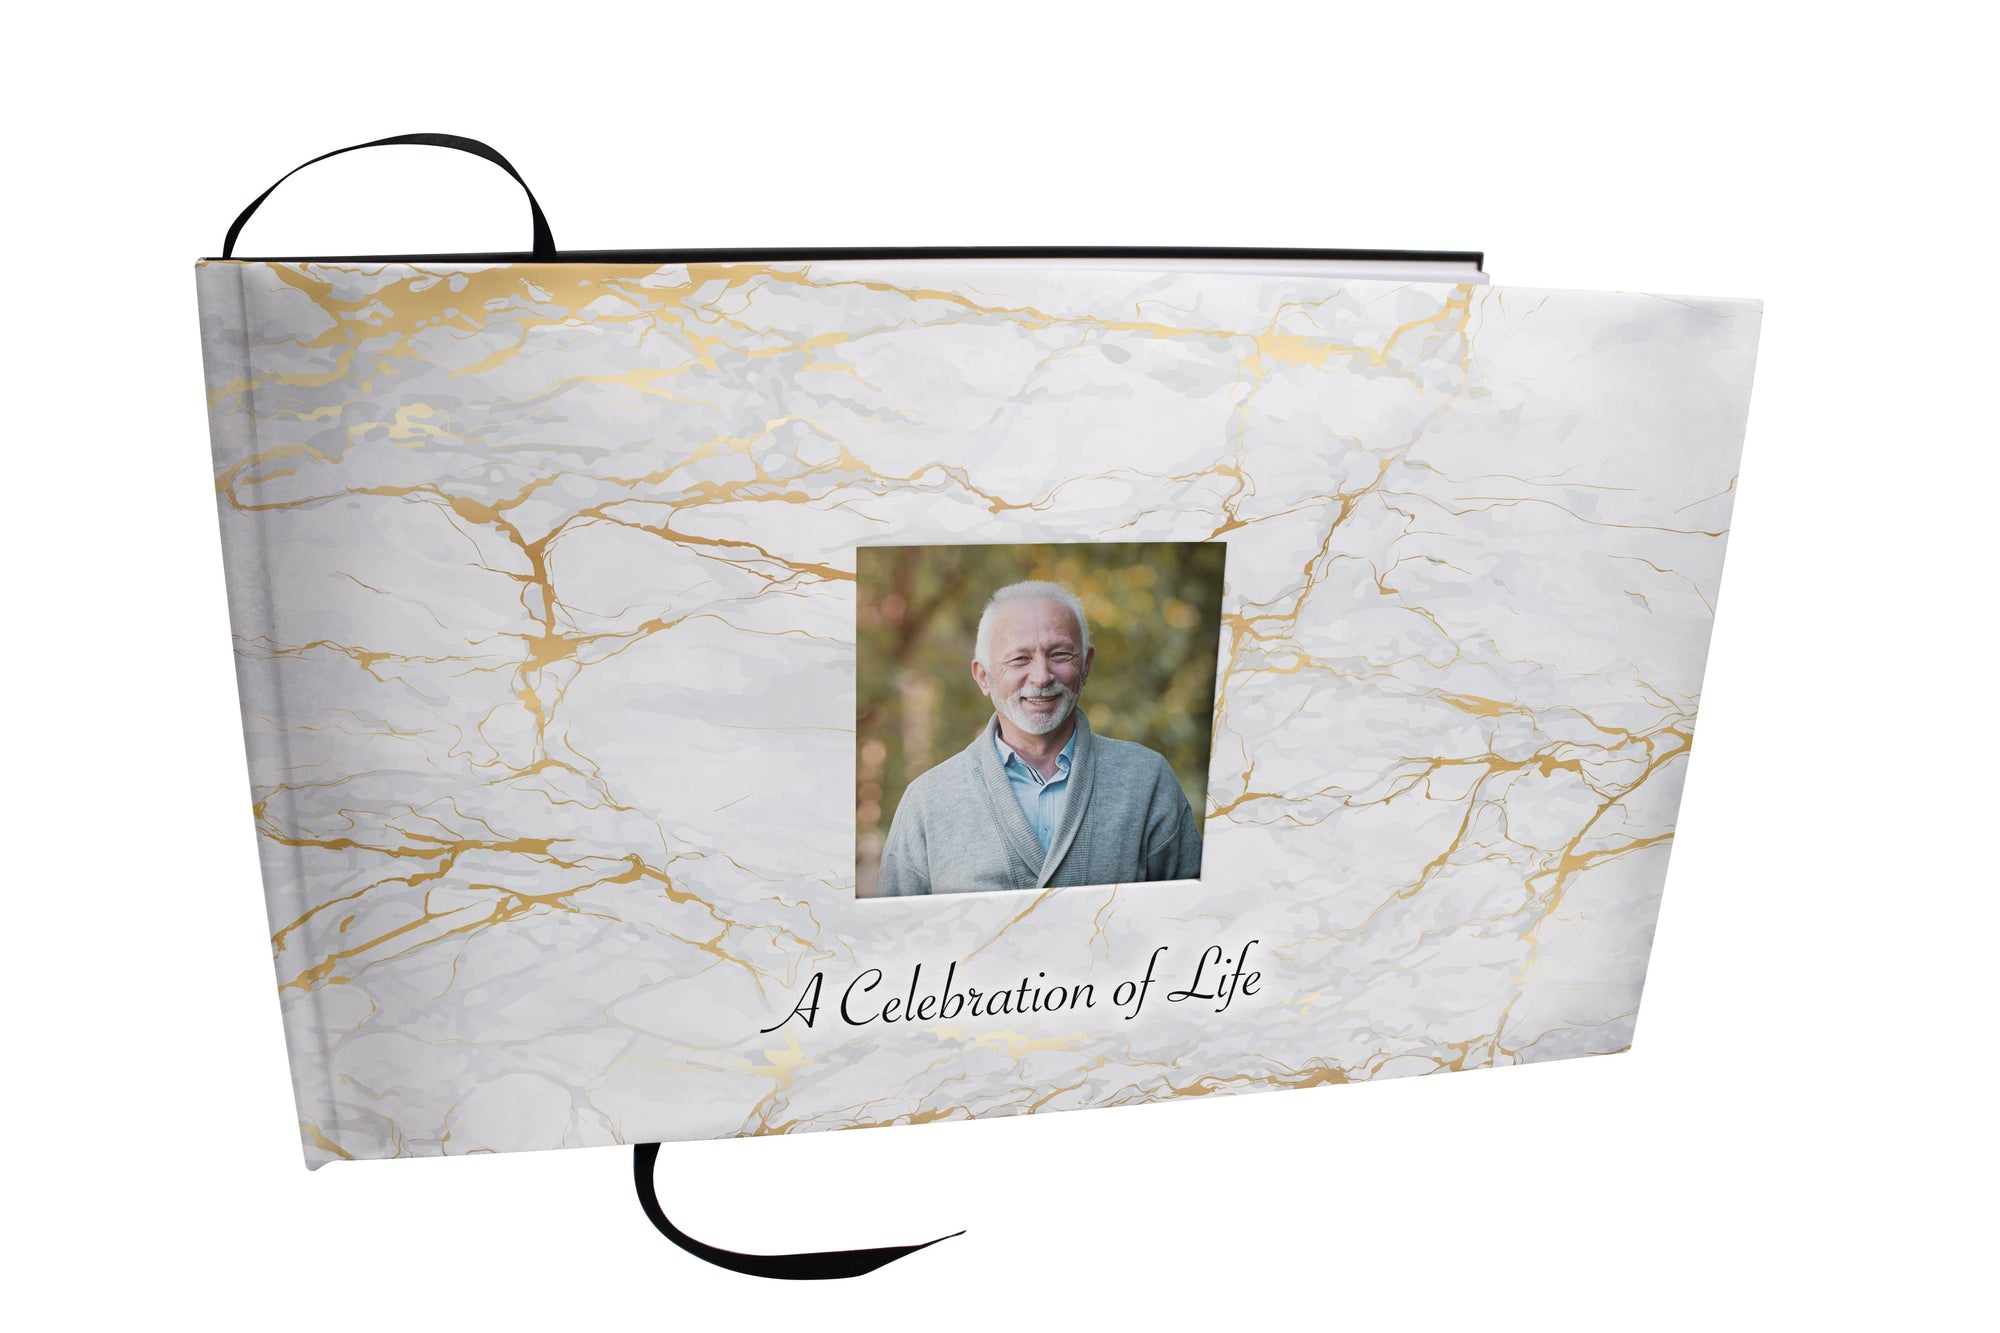 Commemorative Cremation Urns White Marble Matching Themed 'Celebration of Life' Guest Book for Funeral or Memorial Service